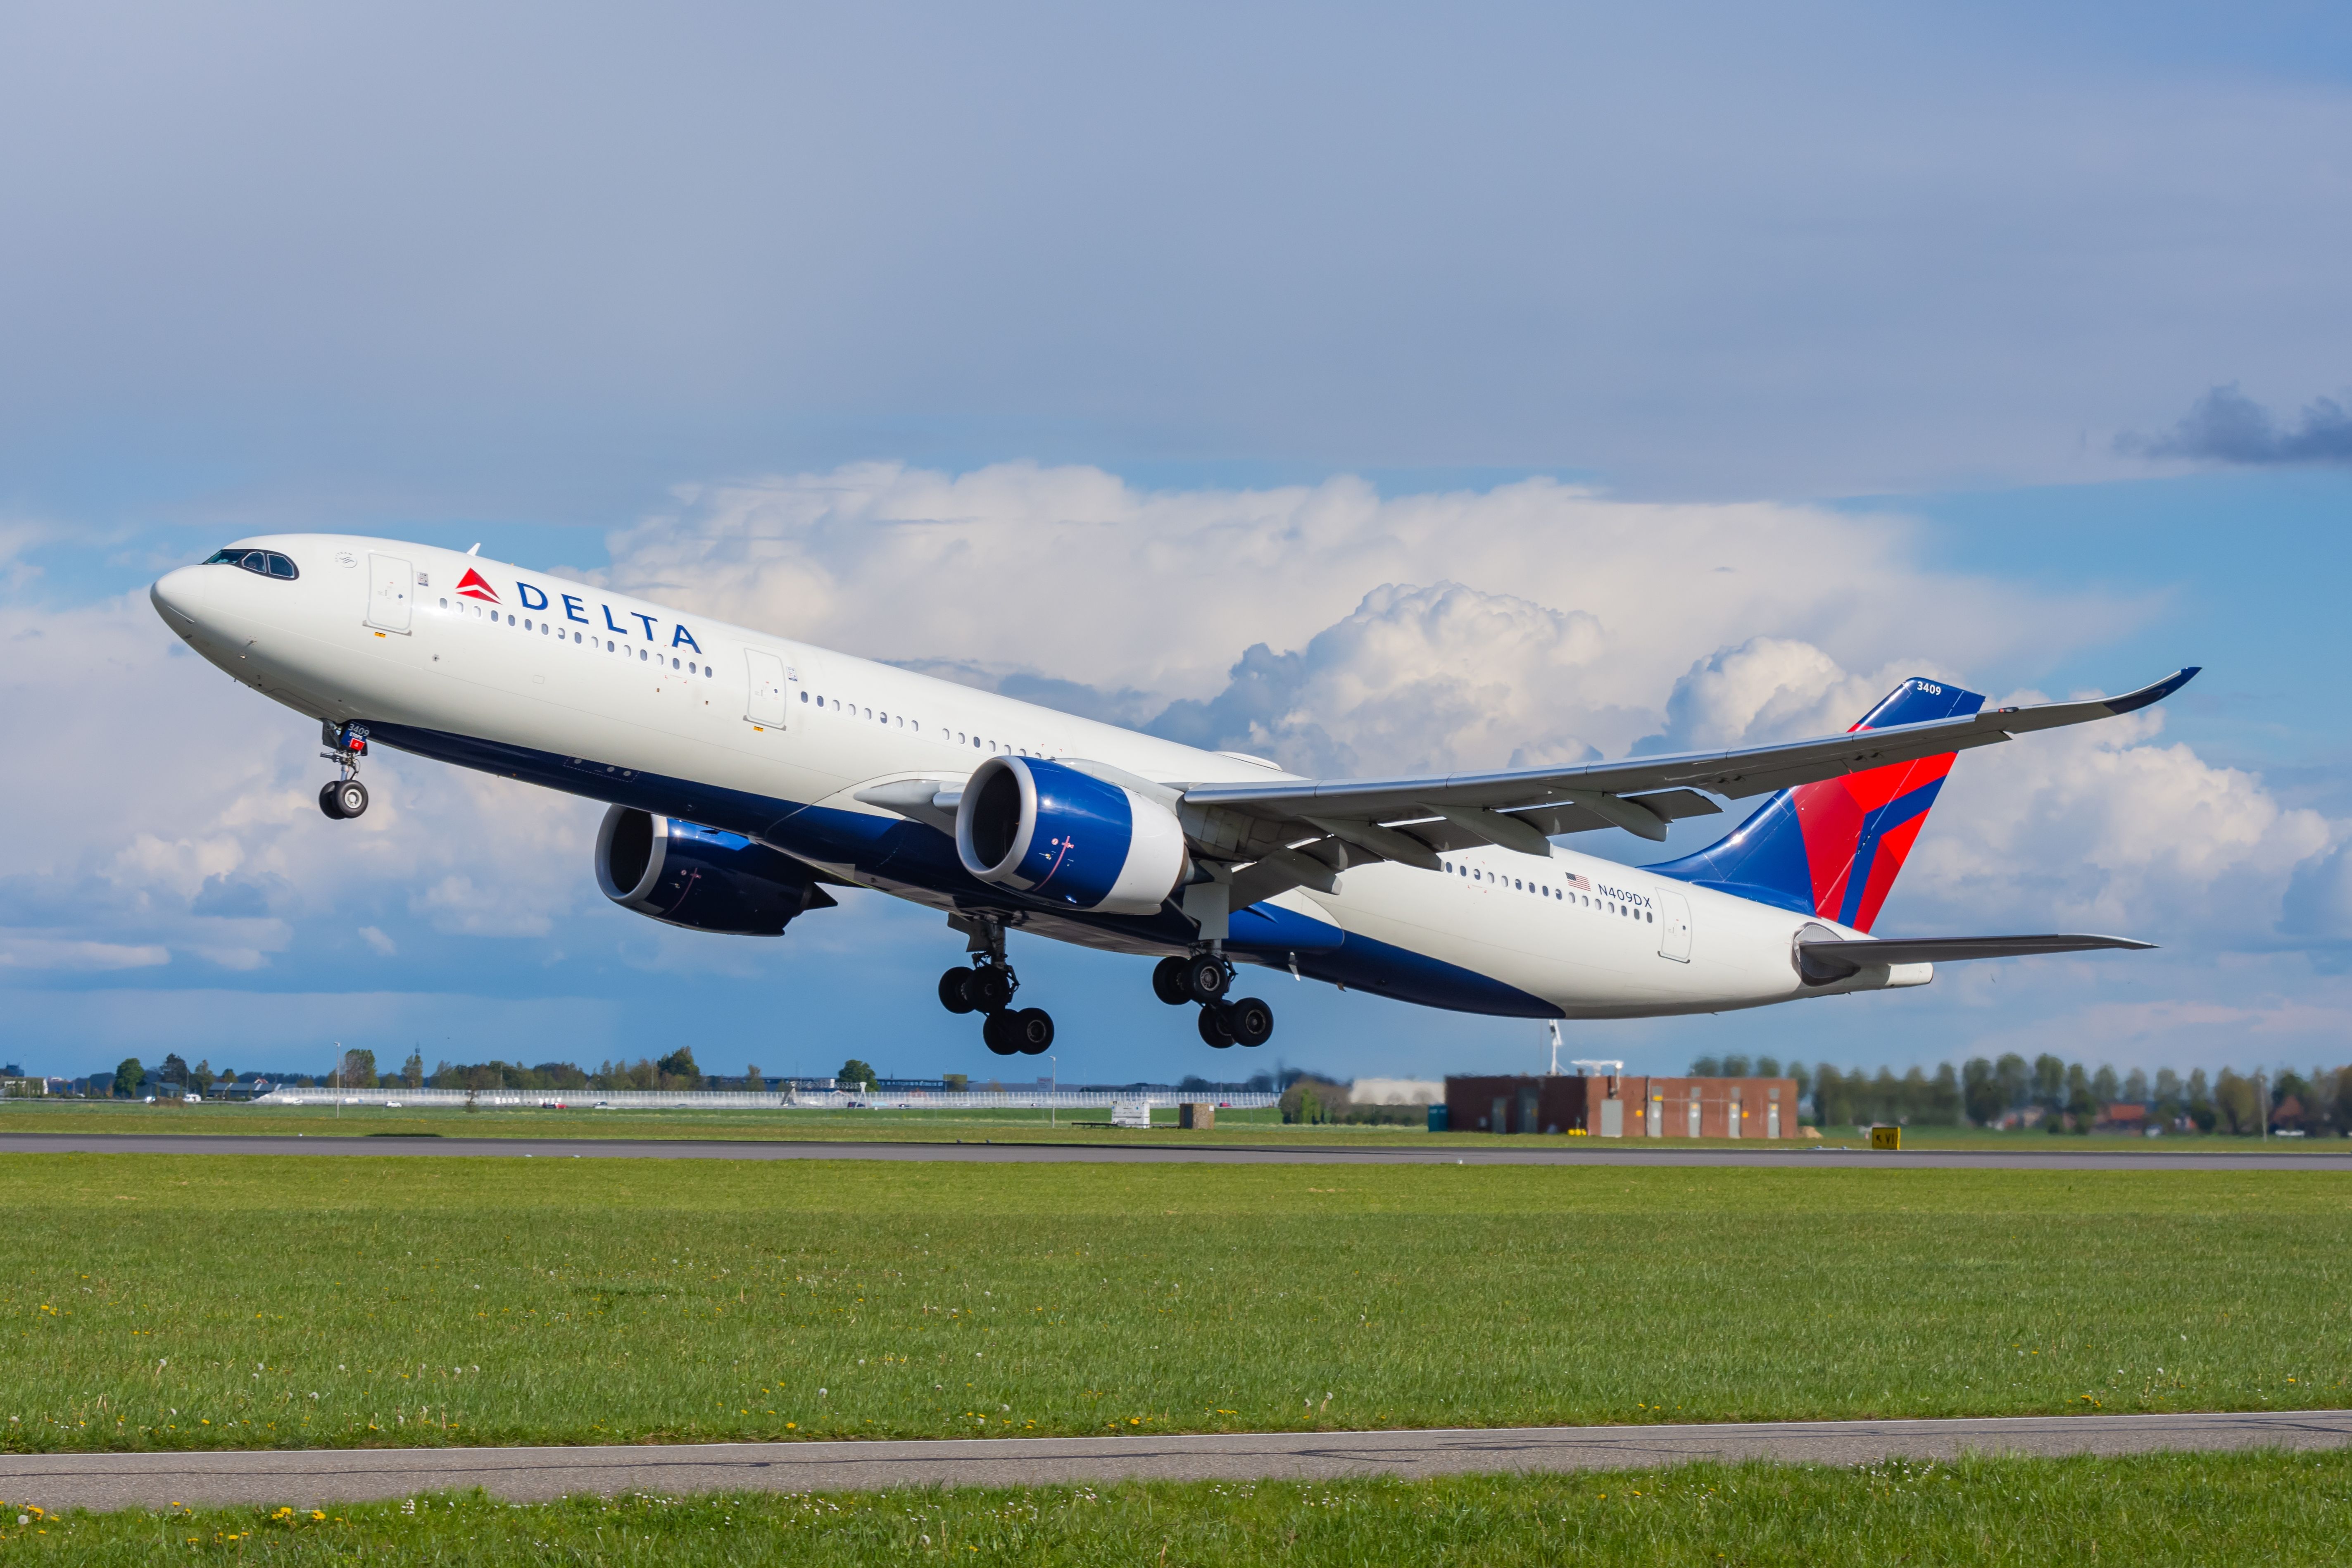 Delta Air Lines Airbus A330-900neo taking off.